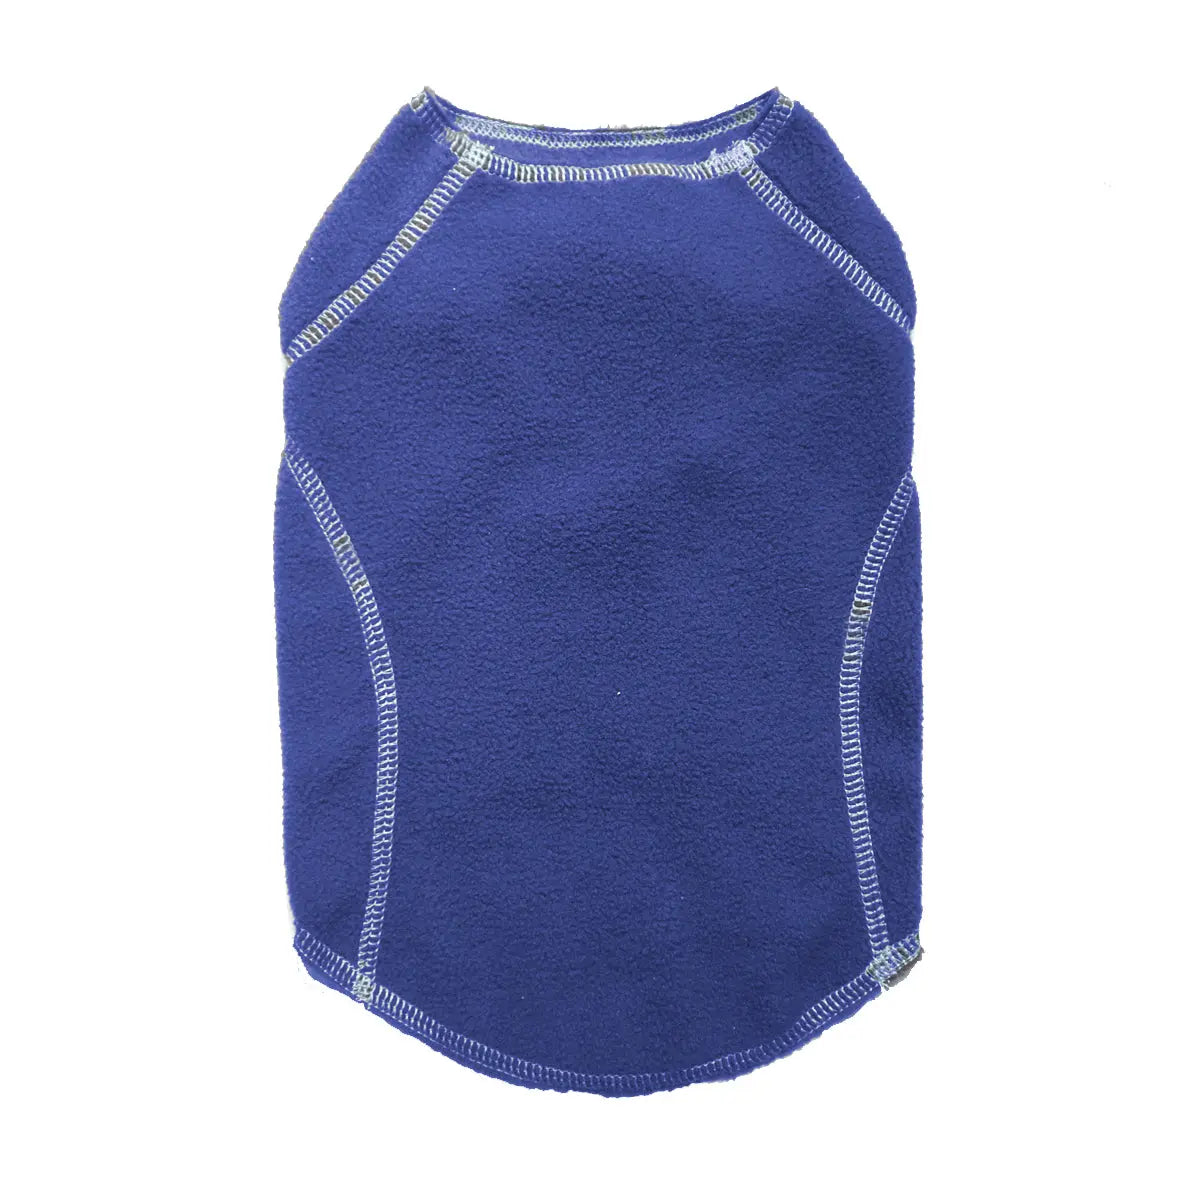 The Ultimate Warm Fleece Sweater for Dogs 3 LBS to 120 LBS